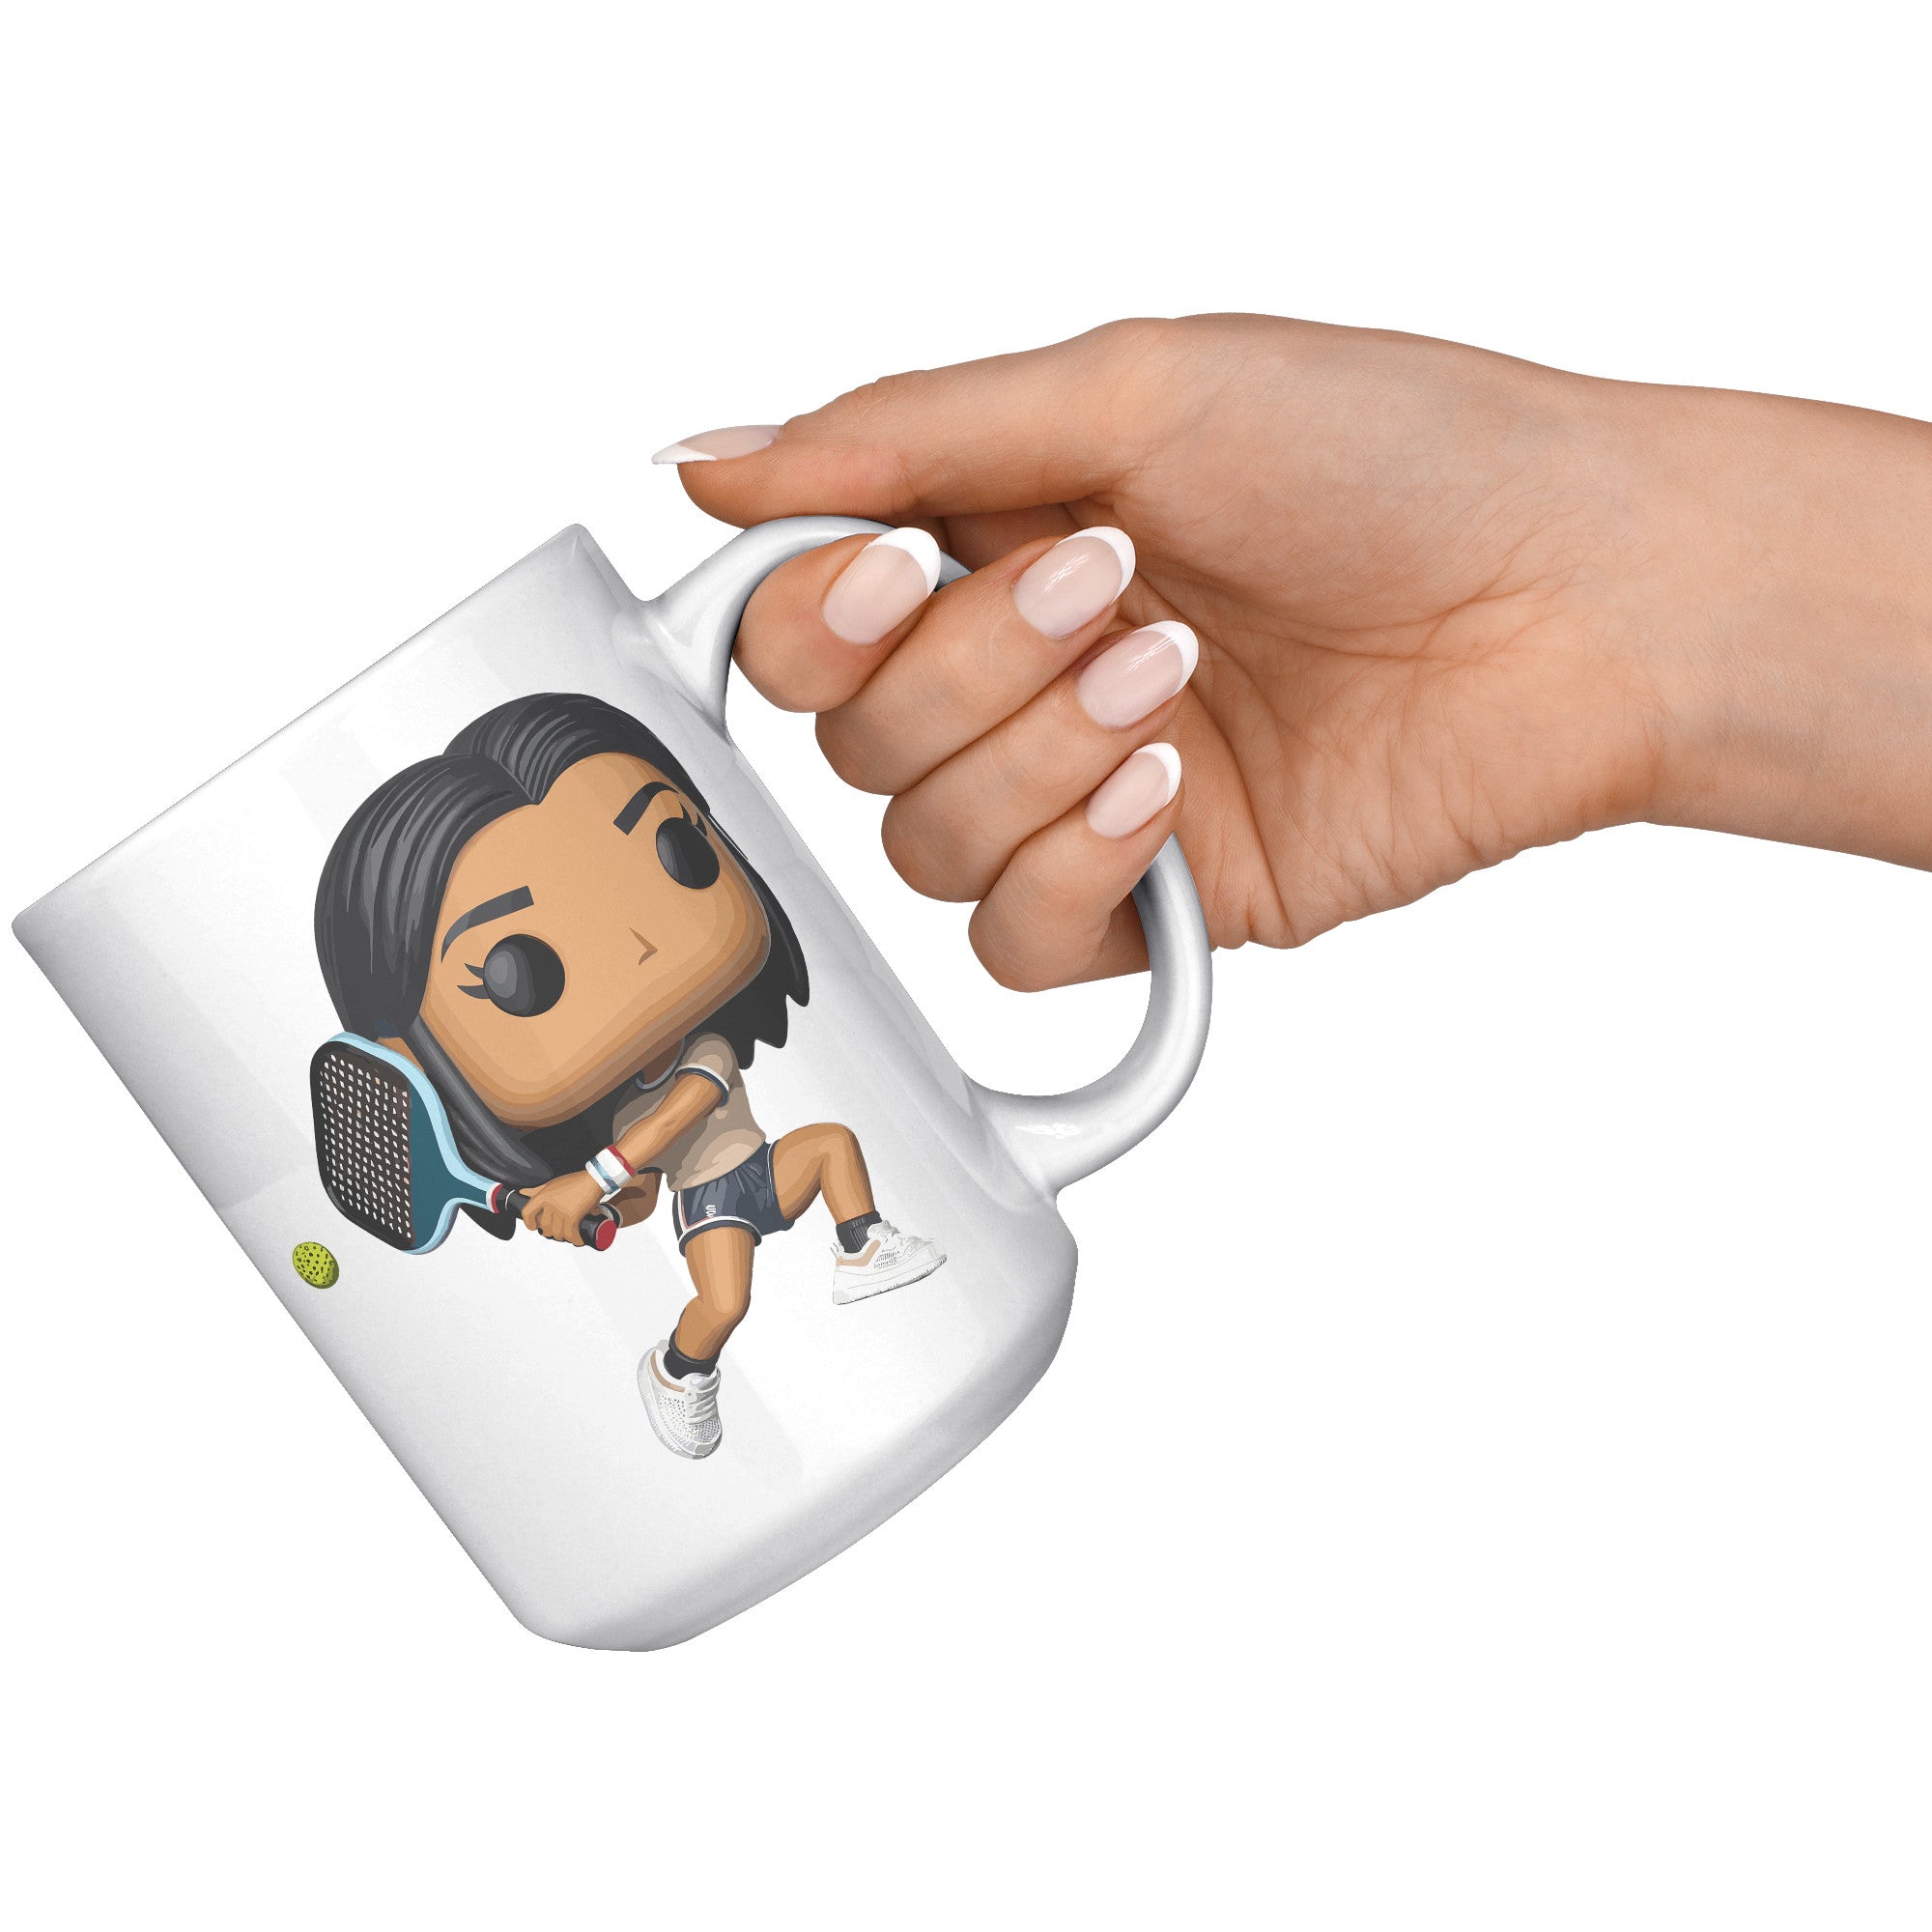 "Funko Pop Style Pickle Ball Player Girl Coffee Mug - Cute Athletic Cup - Perfect Gift for Pickle Ball Enthusiasts - Sporty Chic Apparel" - E1